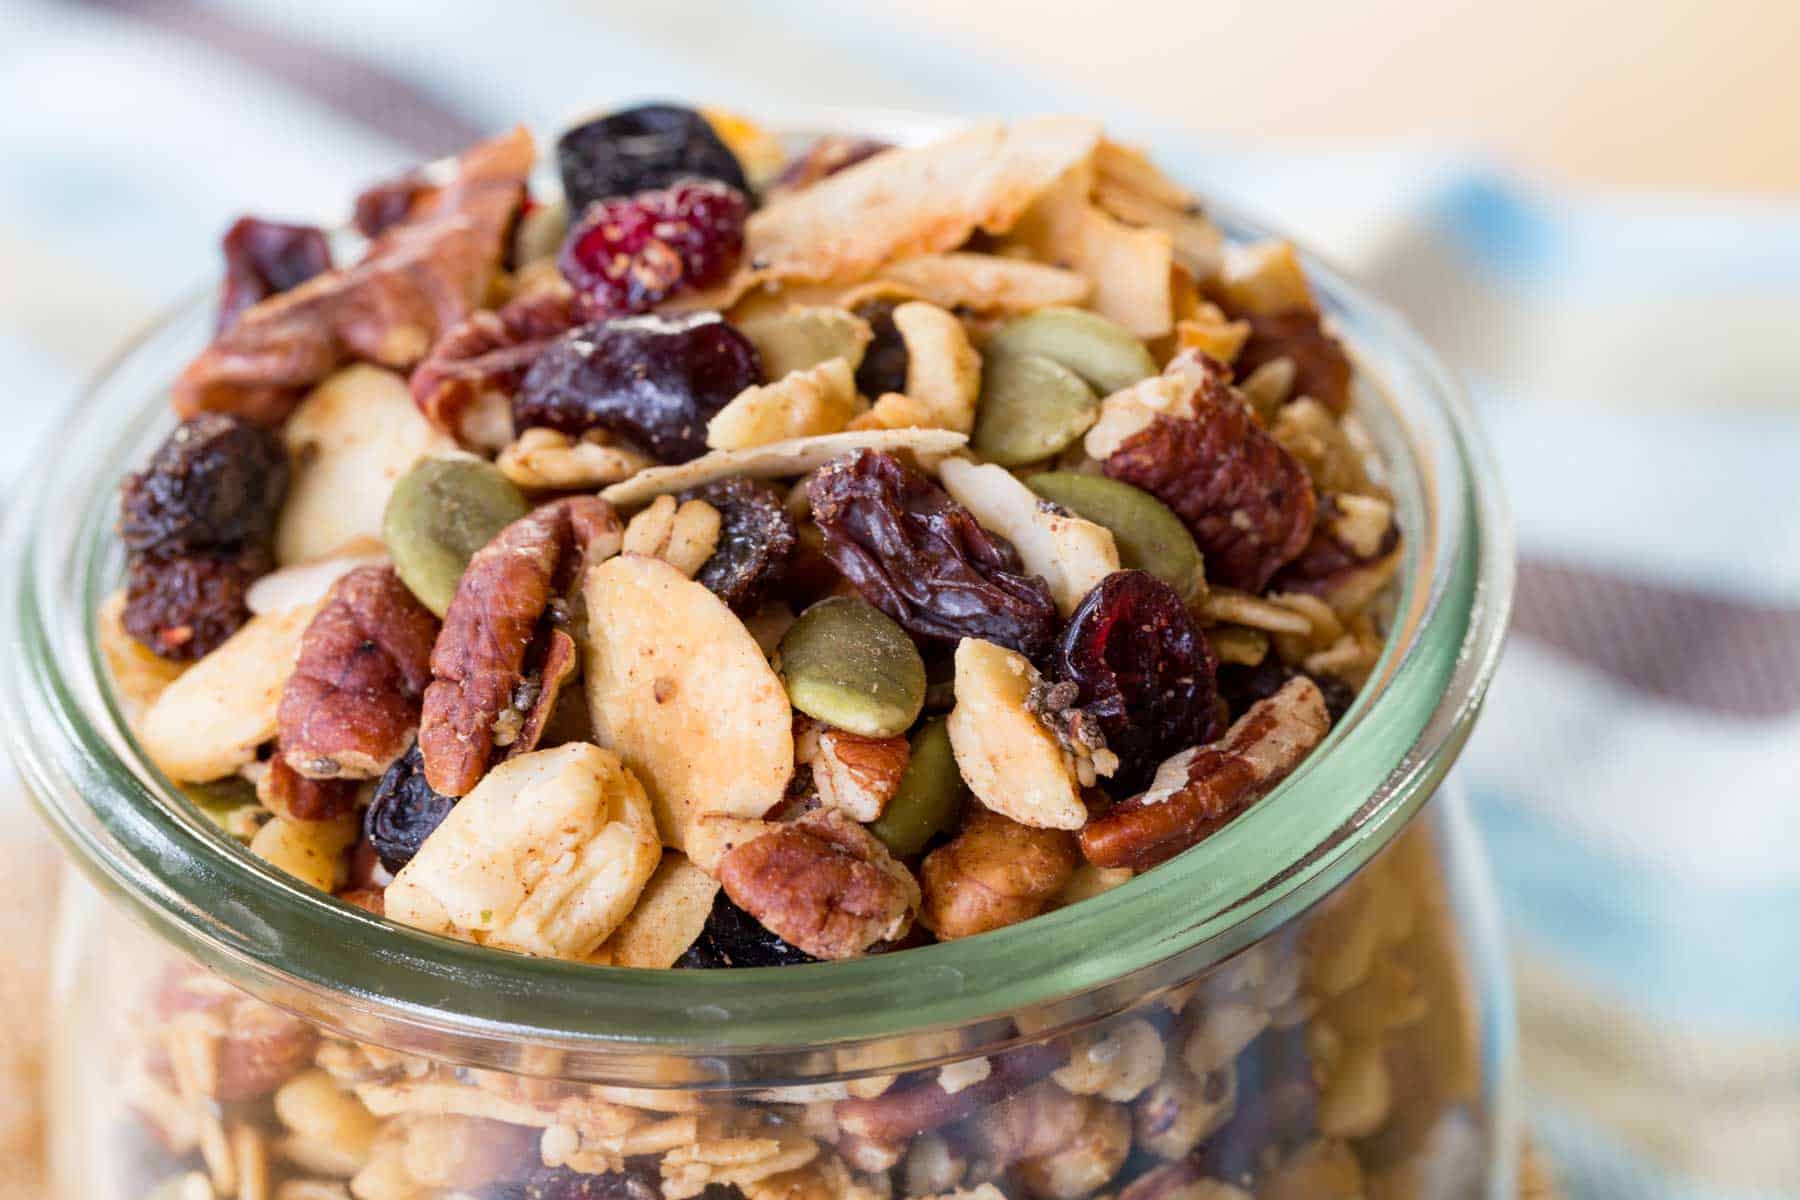 Looking in at the top of a full jar of granola with lots of nuts.